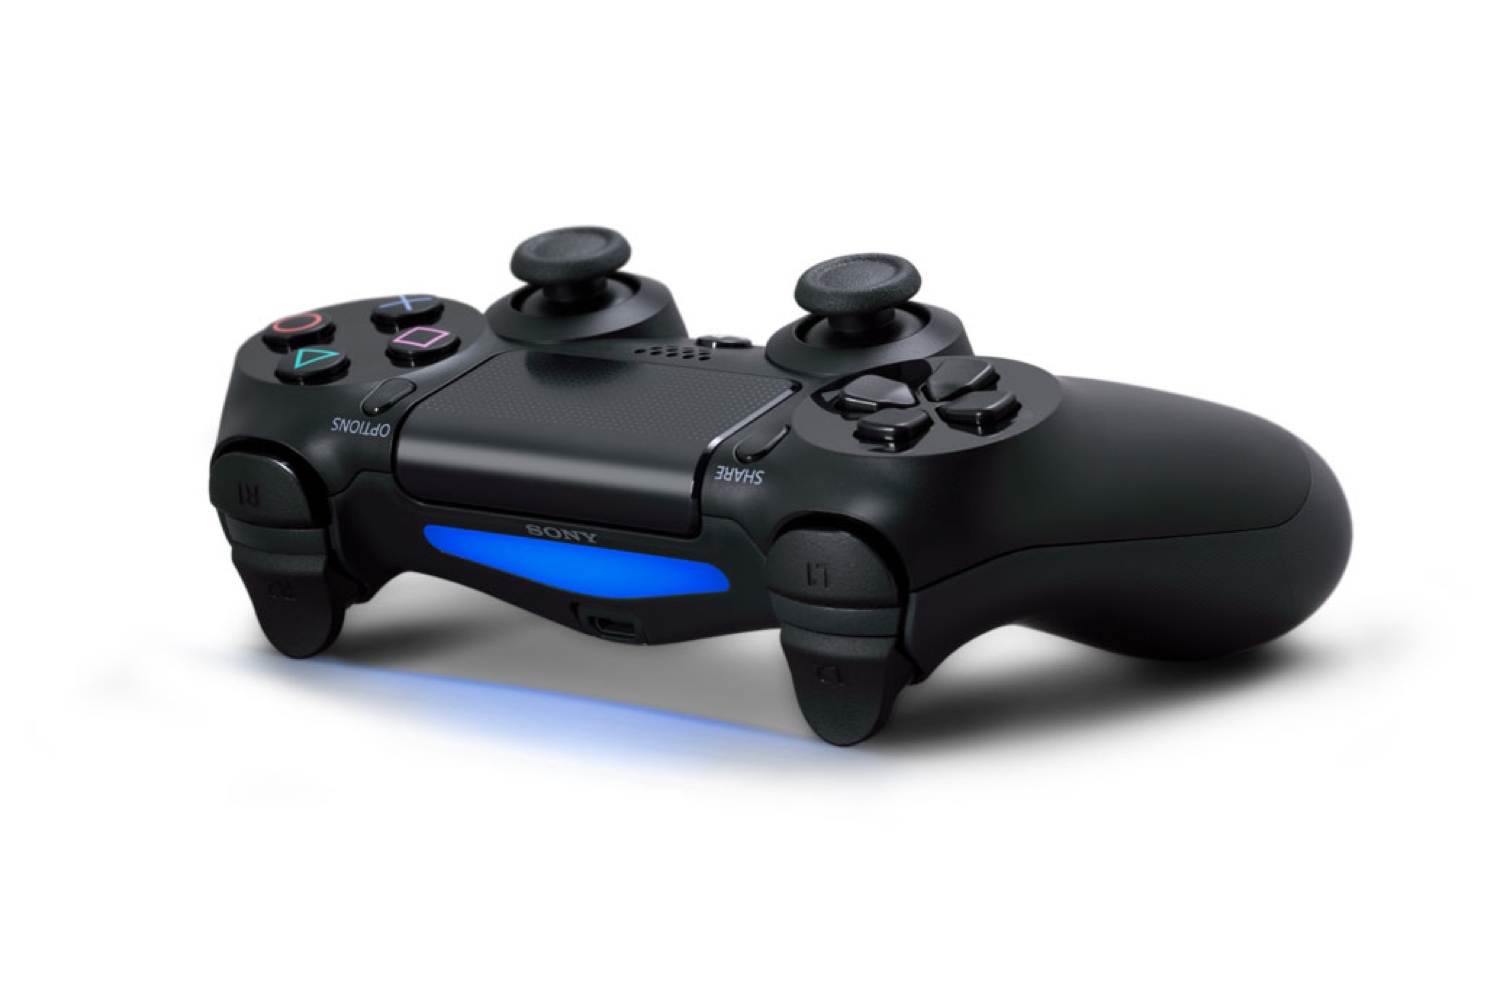 Ashley Furman Iedereen charme The PS4 DualShock 4 GamePad Is Now Bluetooth Compatible with the PS3 | Time